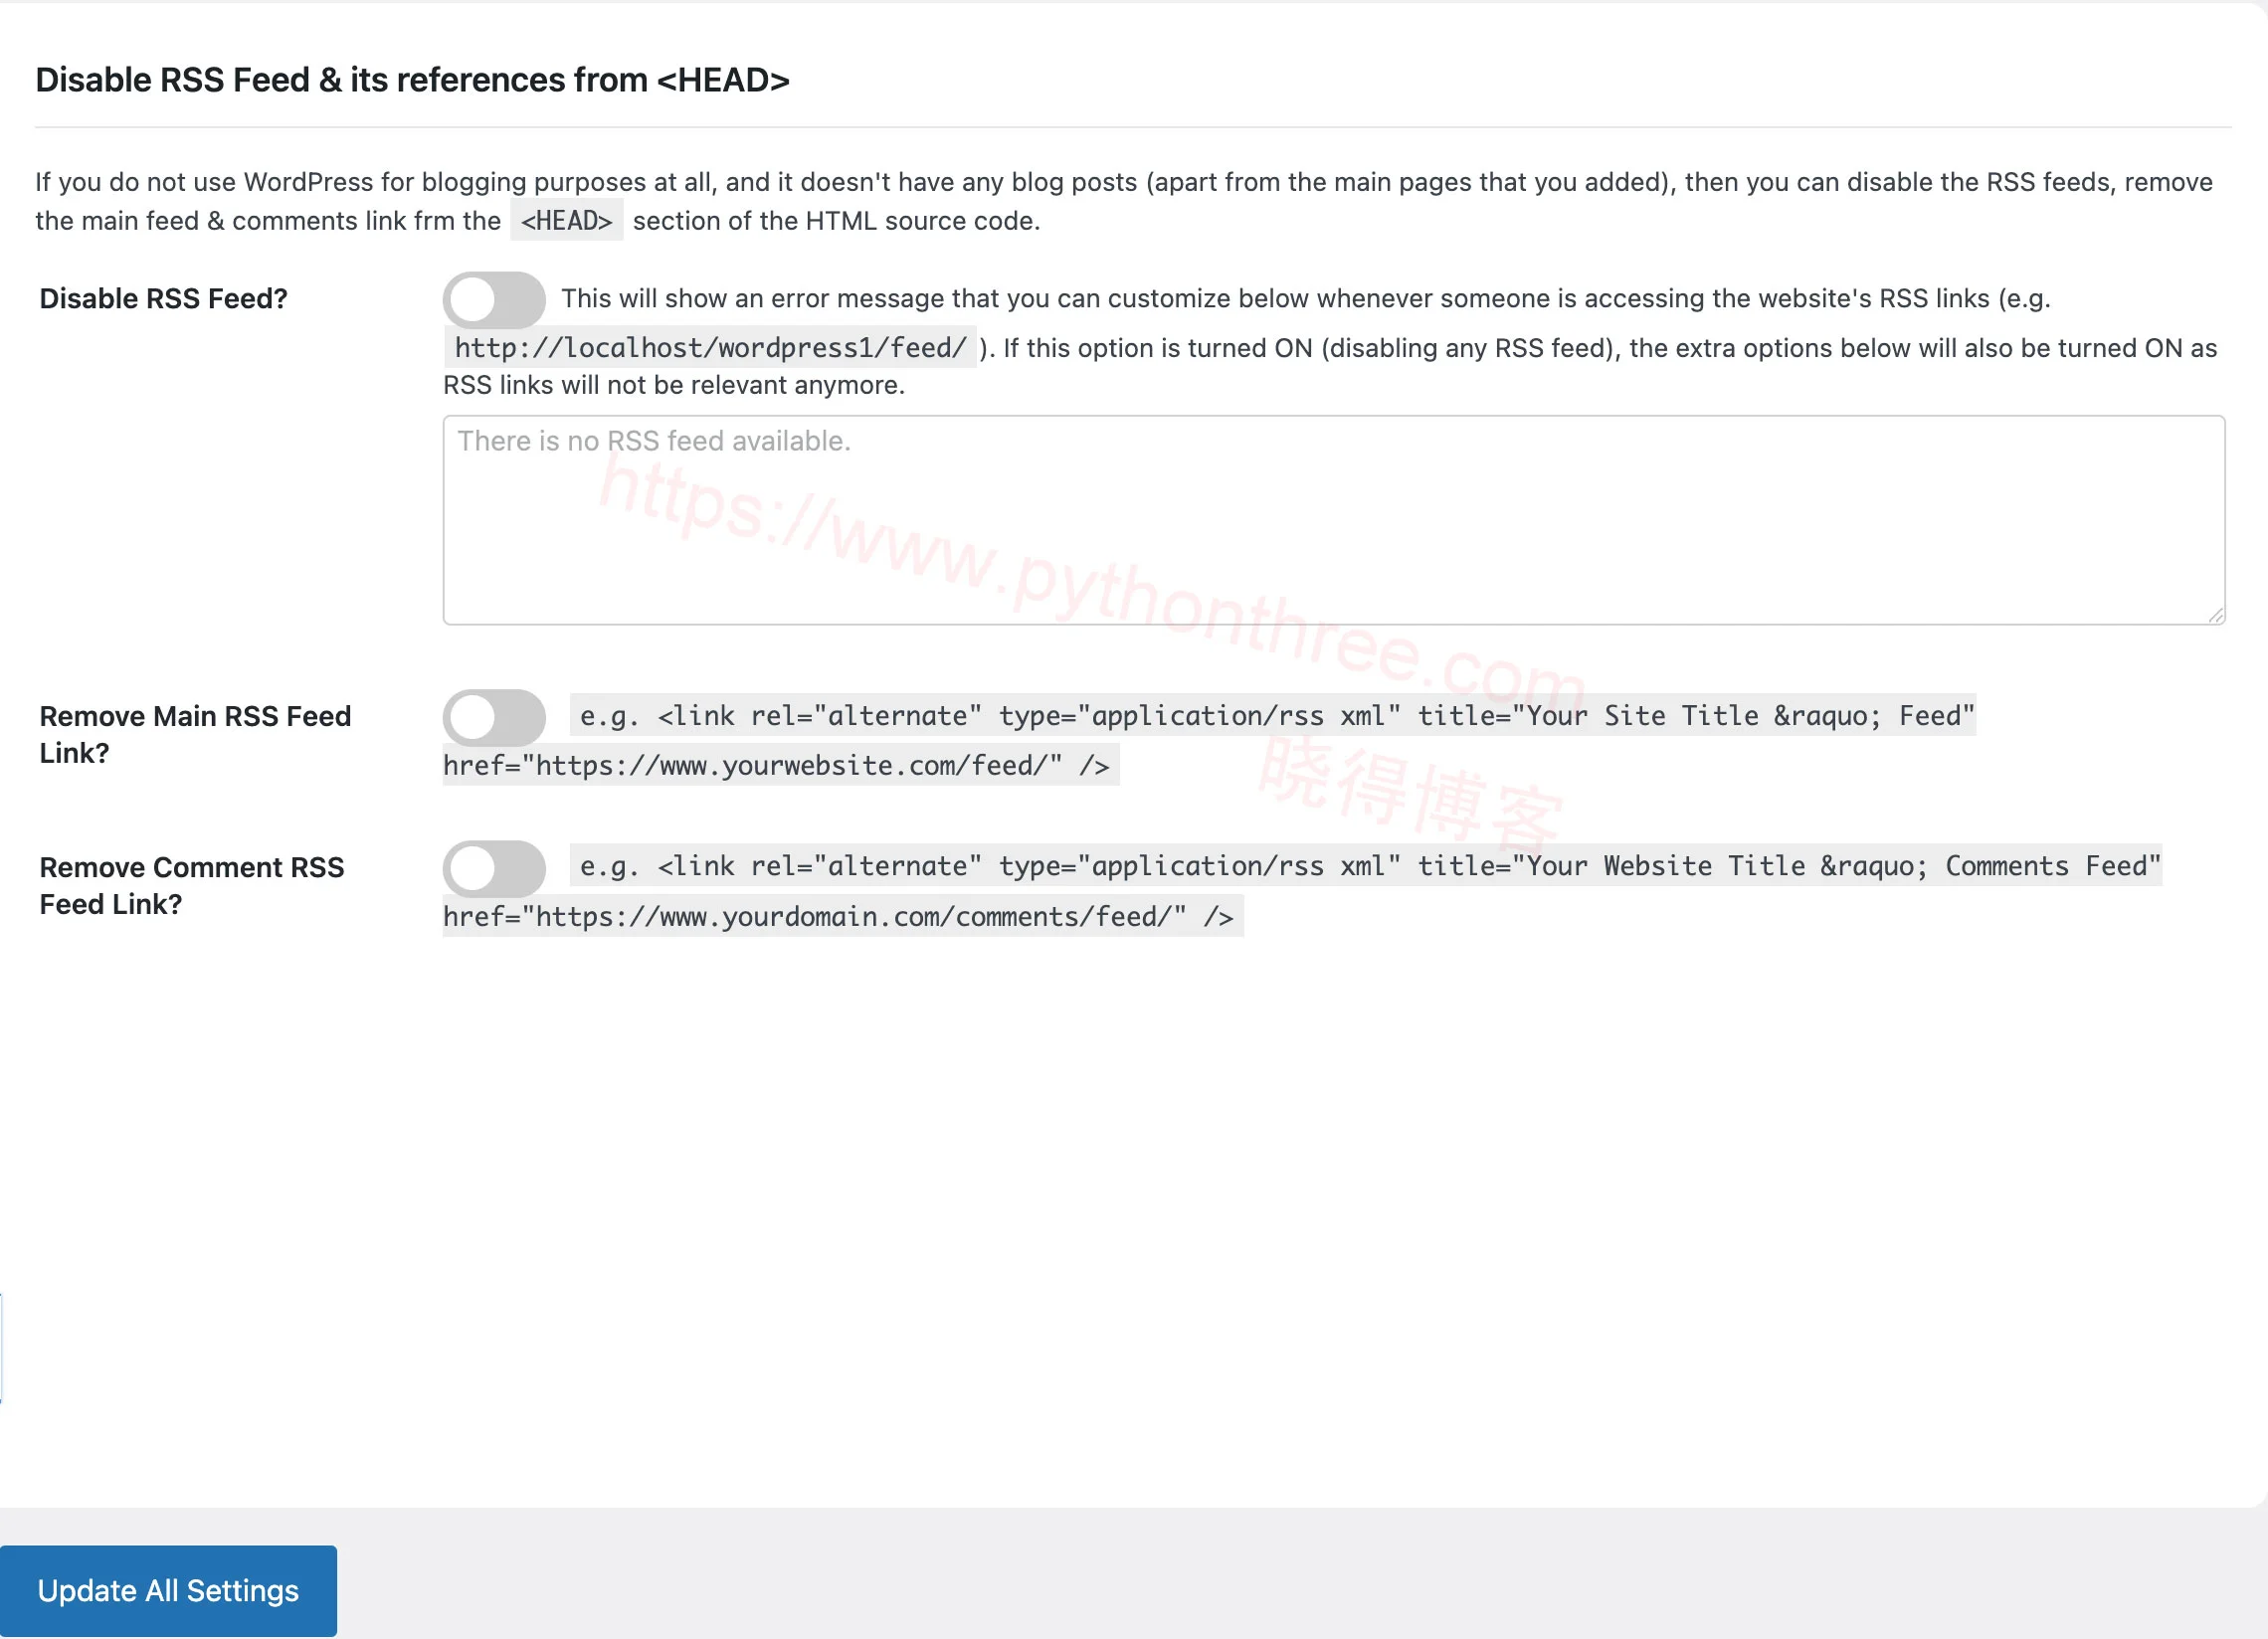 Disable RSS Feed禁用RSS Feed1